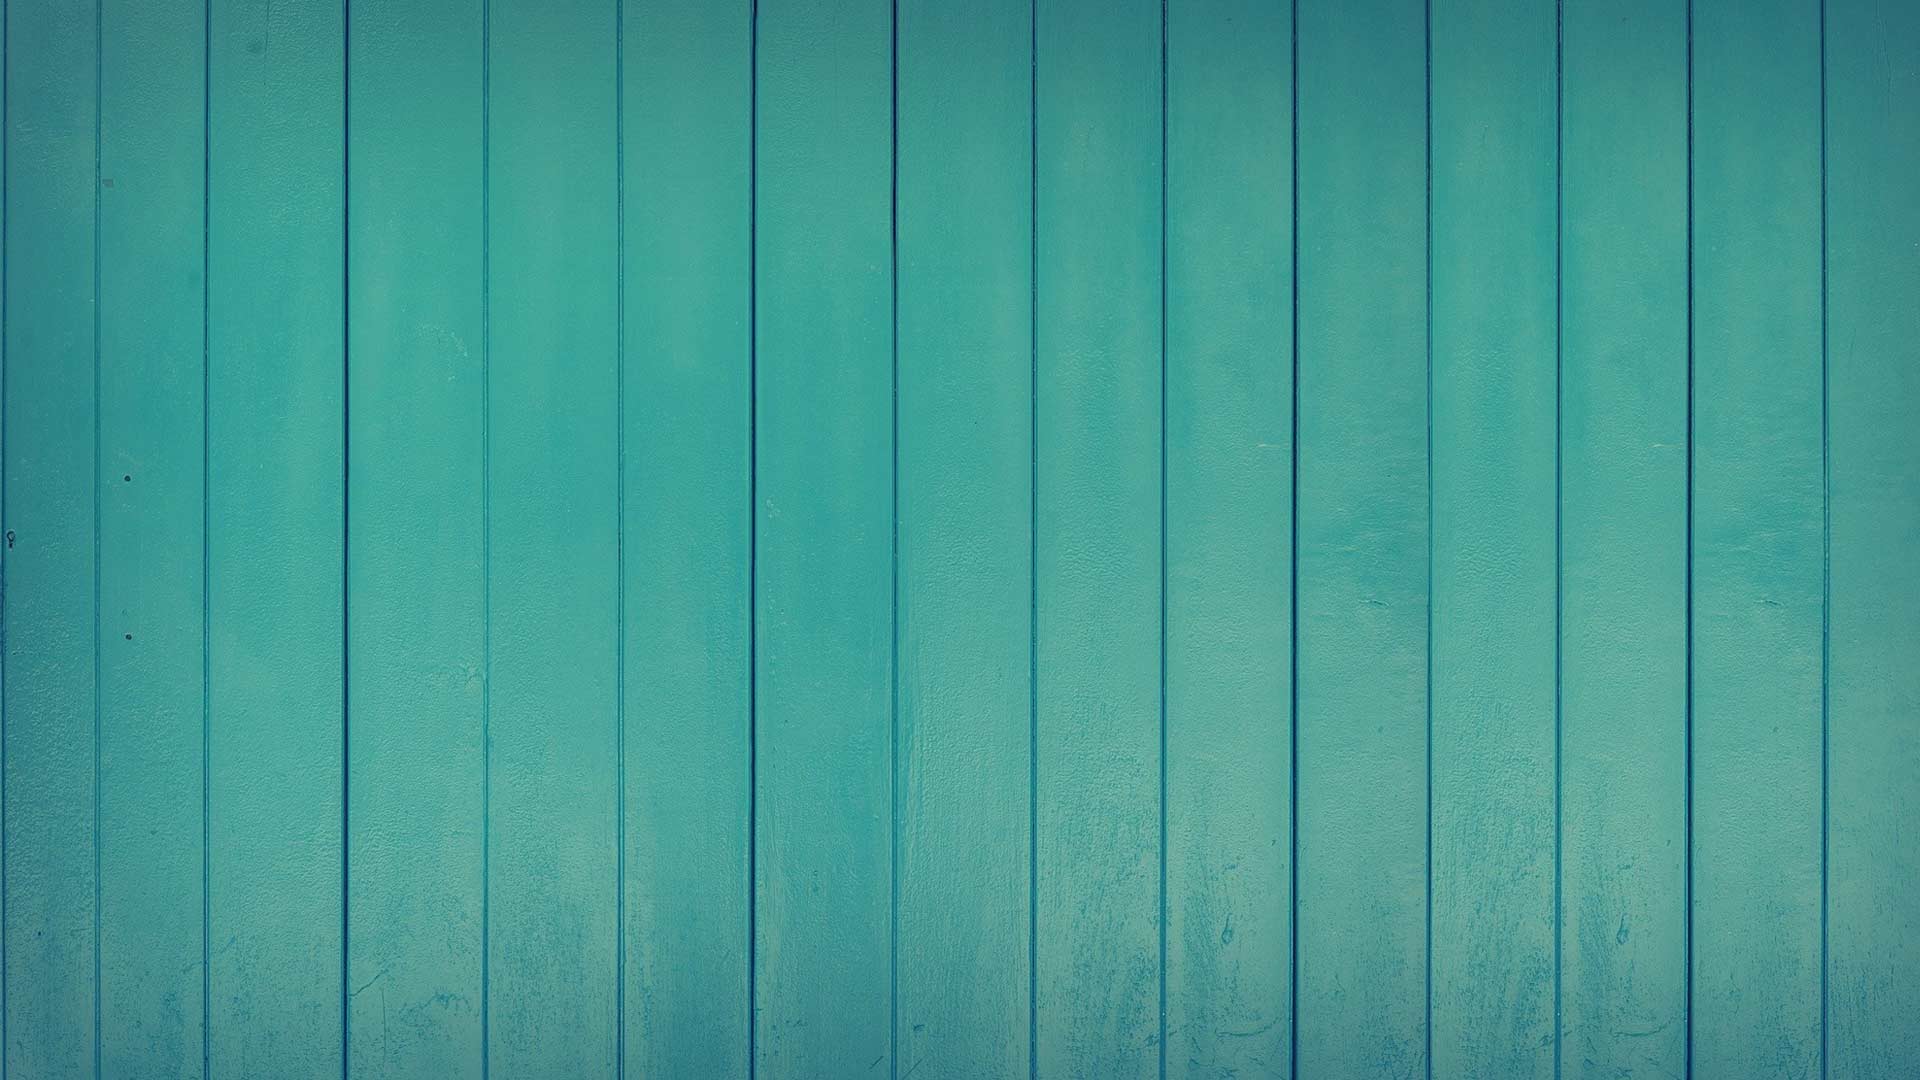 Backgrounds For Zoom Video Calls